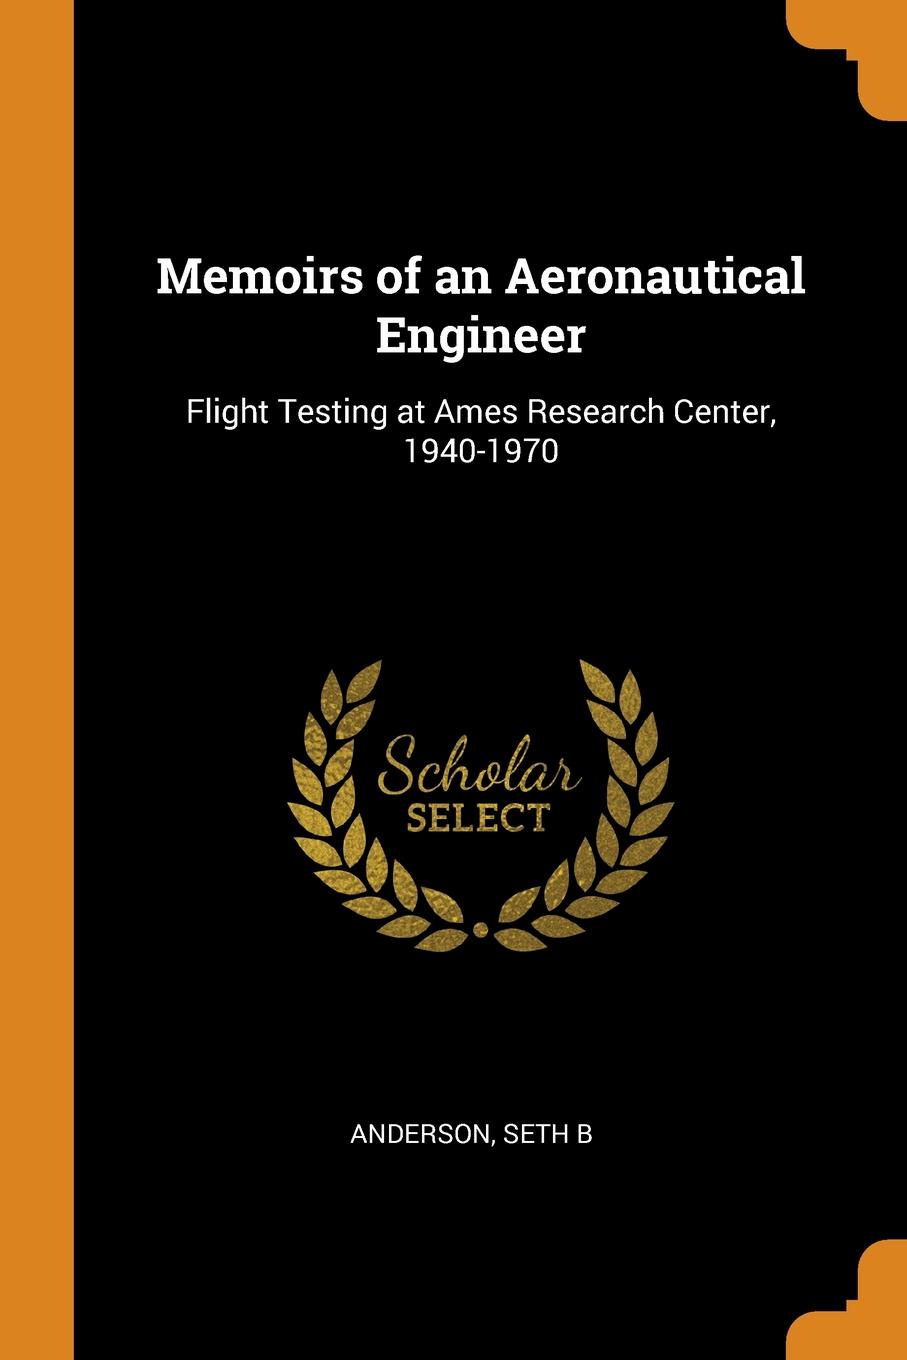 Memoirs of an Aeronautical Engineer. Flight Testing at Ames Research Center, 1940-1970